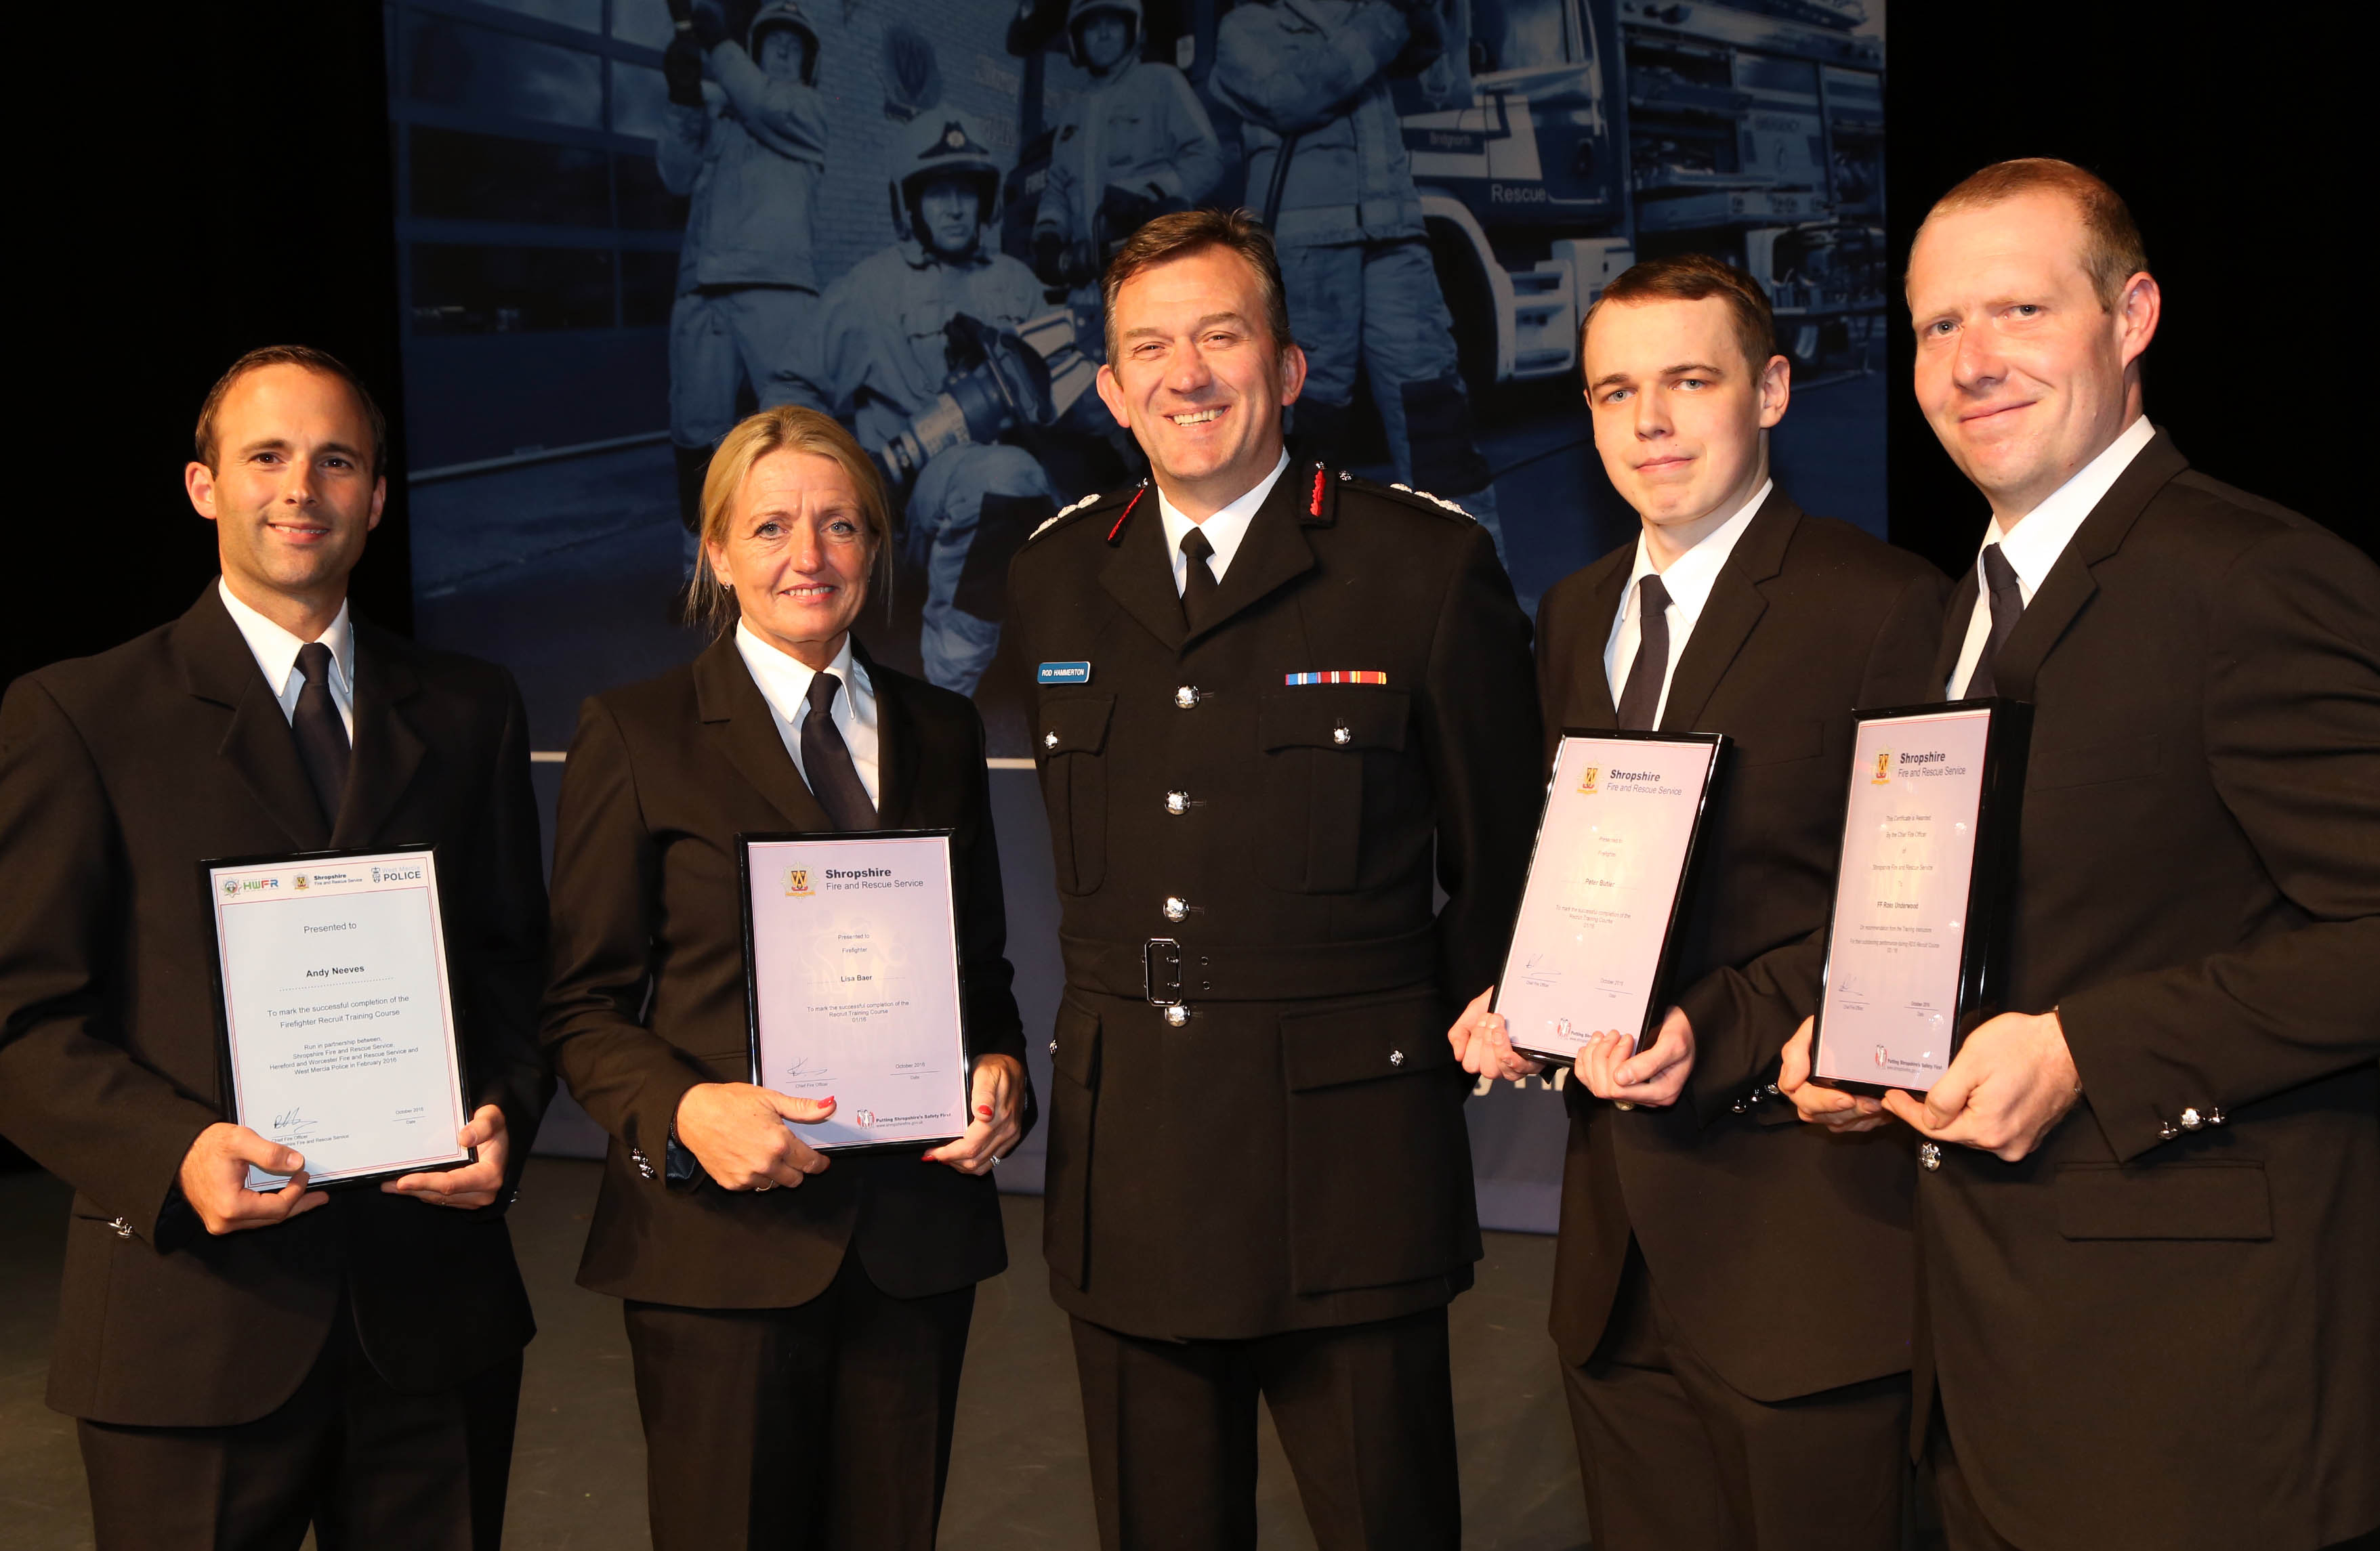 Also featured were firefighters Andy Neeves, a Police CSO from Oswestry; Lisa Baer, from Prees, who joined when Prees firefighters helped her daughter in a road crash; Tesco fishmonger Peter Butler, from Ellesmere, and Hodnet Hall gardener Ross Underwood who won the instructors award for his course.